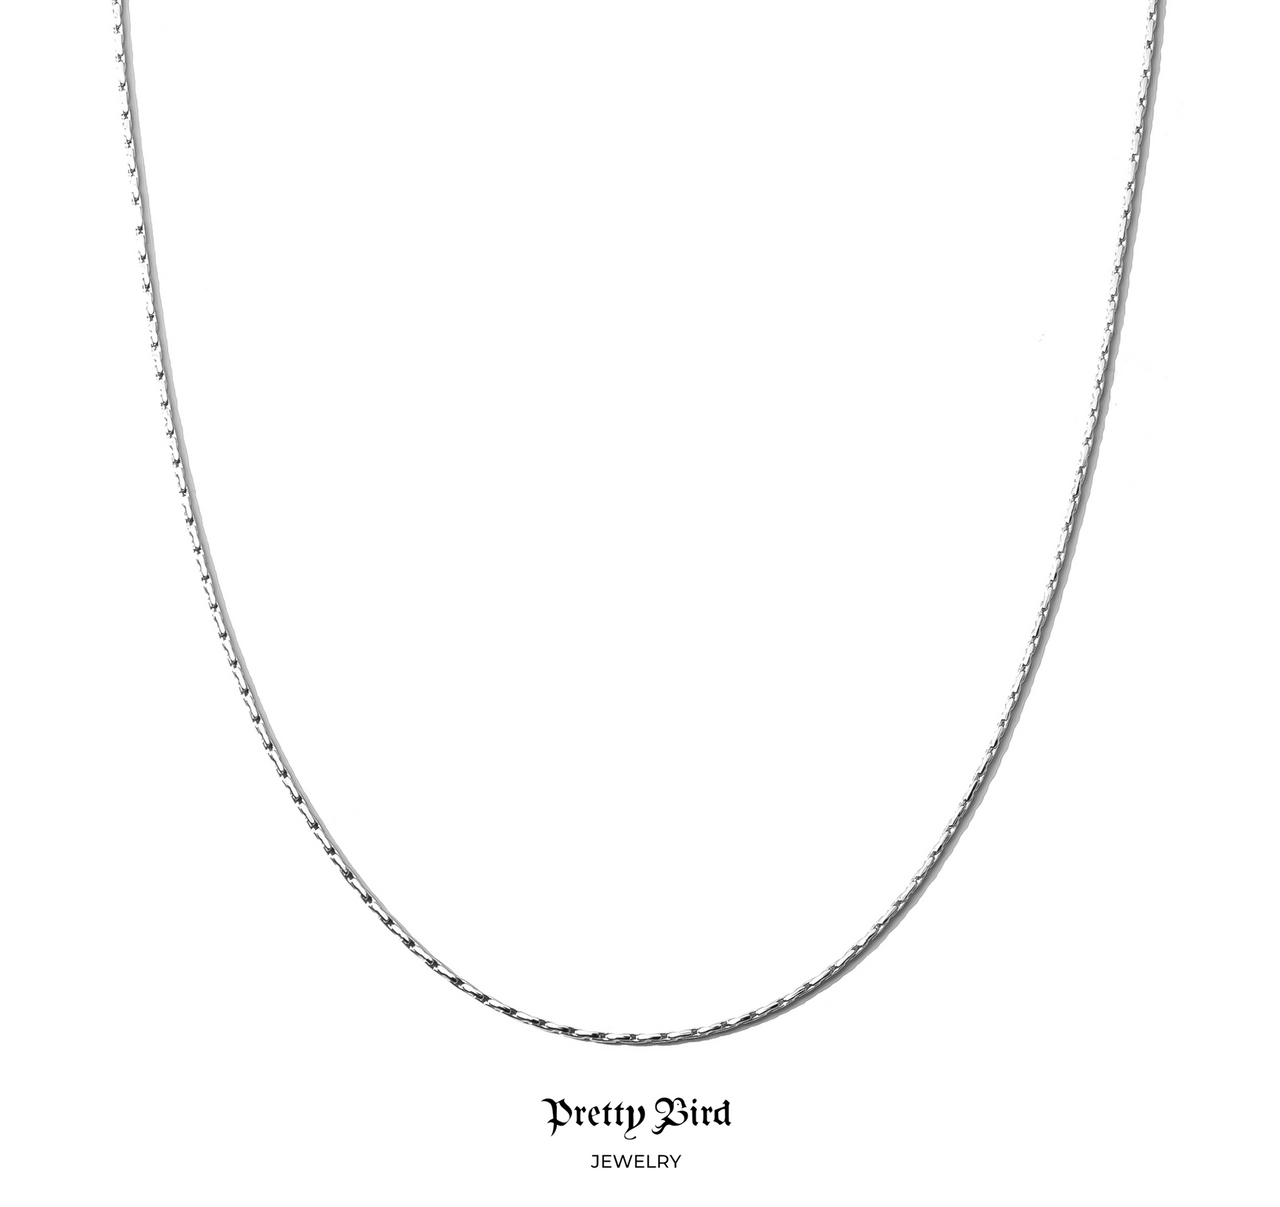 The White Skinny Snake Chain Necklace